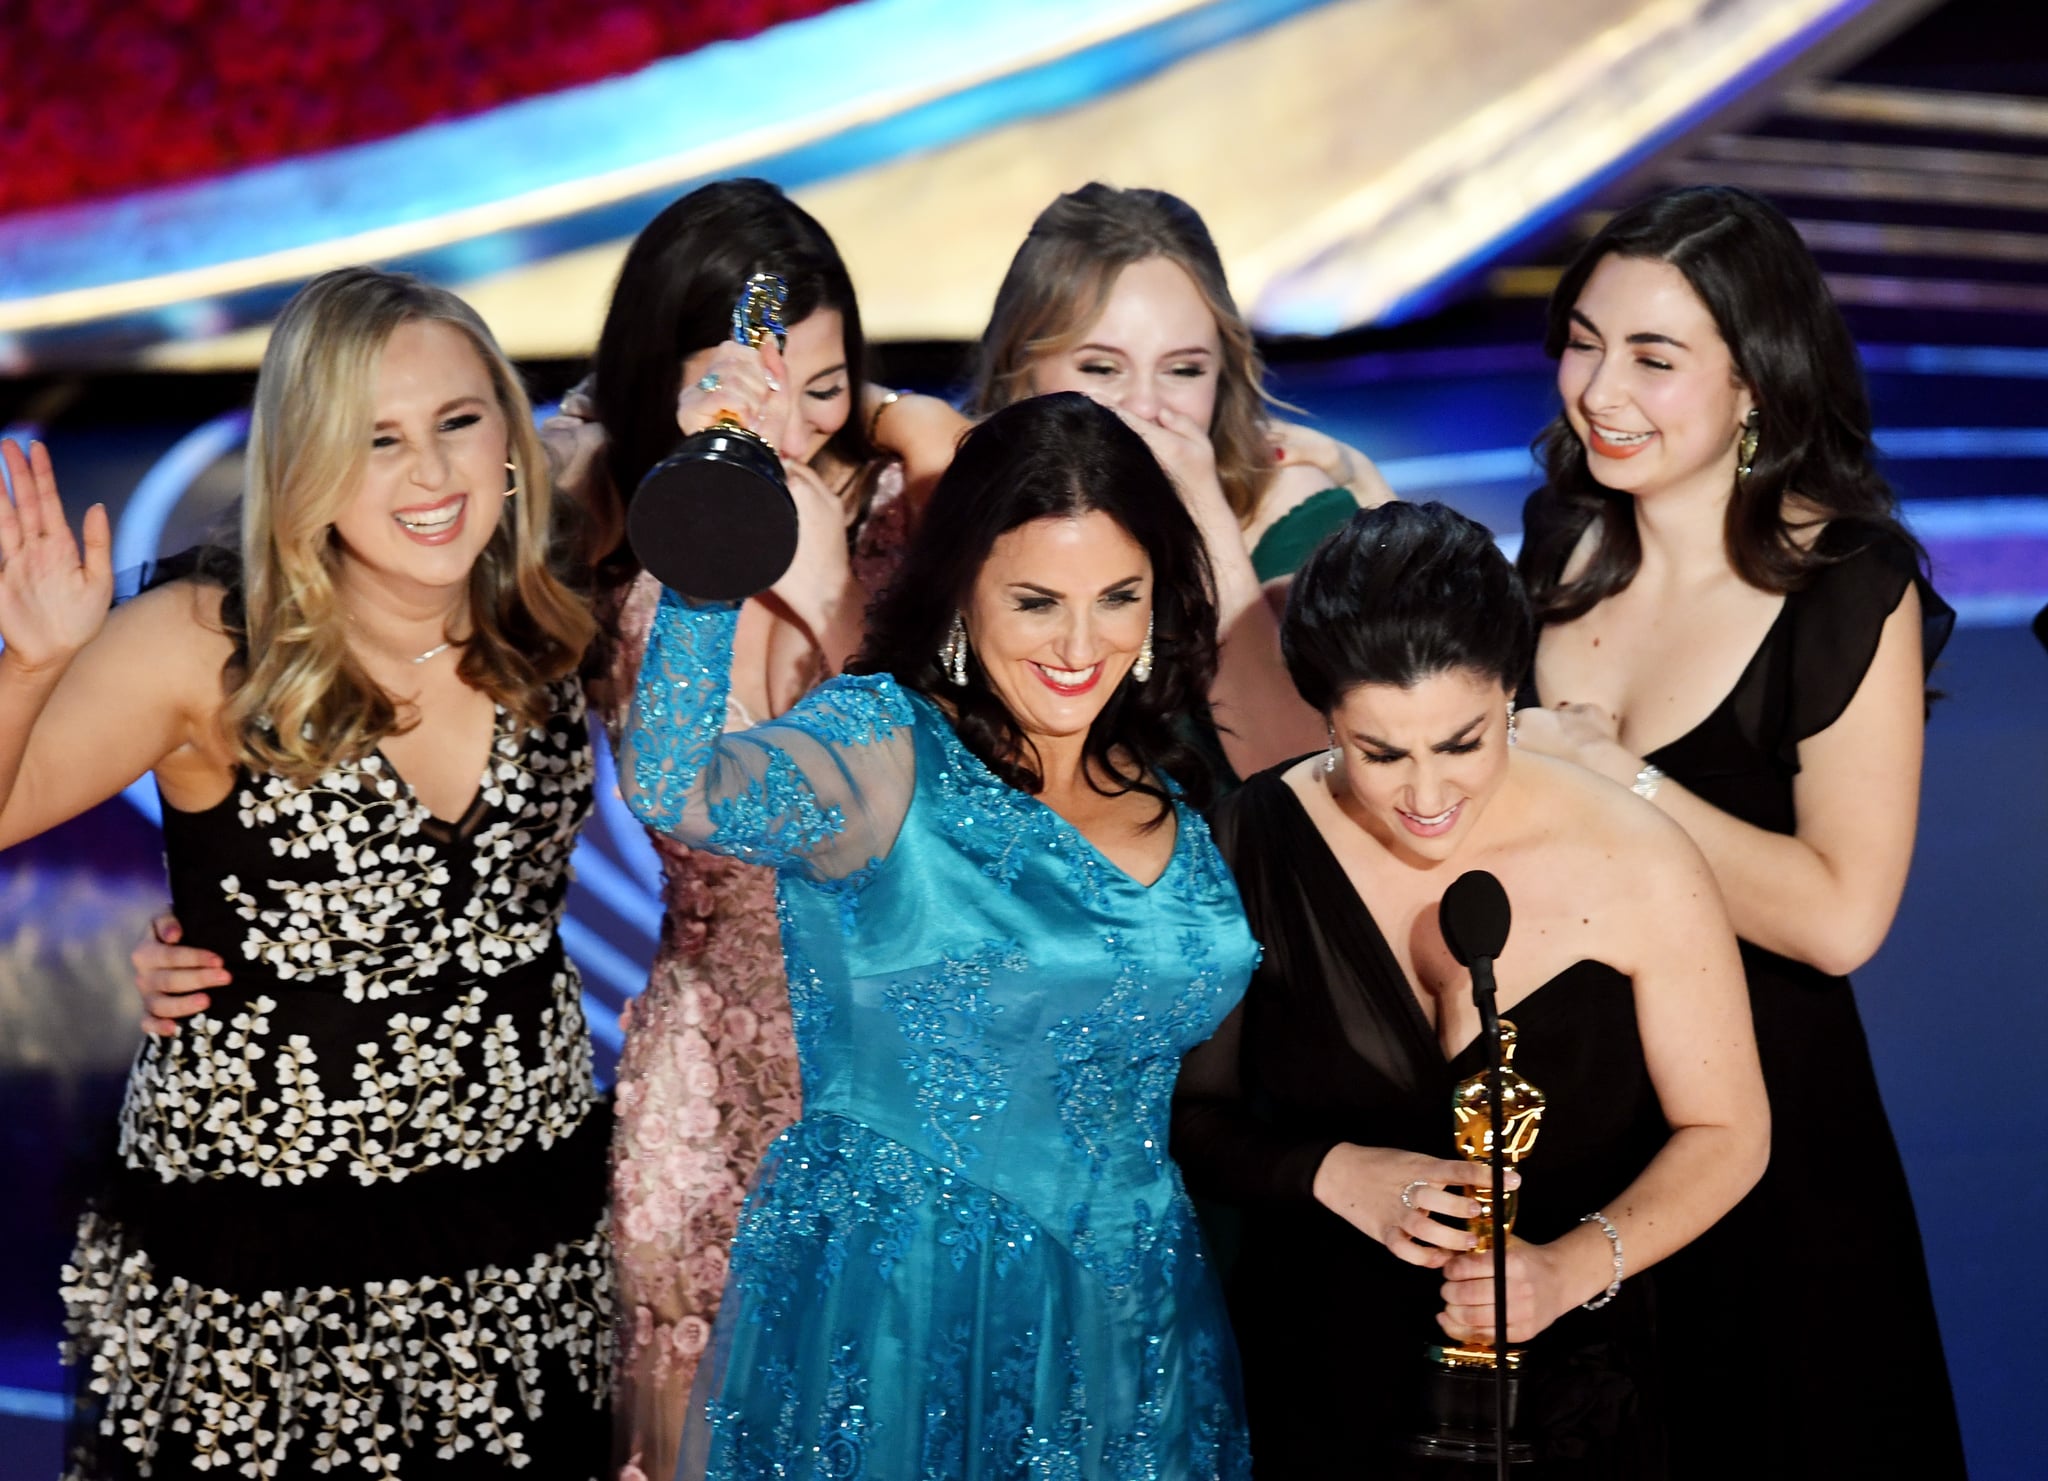 HOLLYWOOD, CALIFORNIA - FEBRUARY 24: Melissa Berton (centre L) and Rayka Zehtabchi (centre R) accept the Short Film (Live Action) award for 'Period. End of Sentence.' onstage during the 91st Annual Academy Awards at Dolby Theatre on February 24, 2019 in Hollywood, California. (Photo by Kevin Winter/Getty Images)